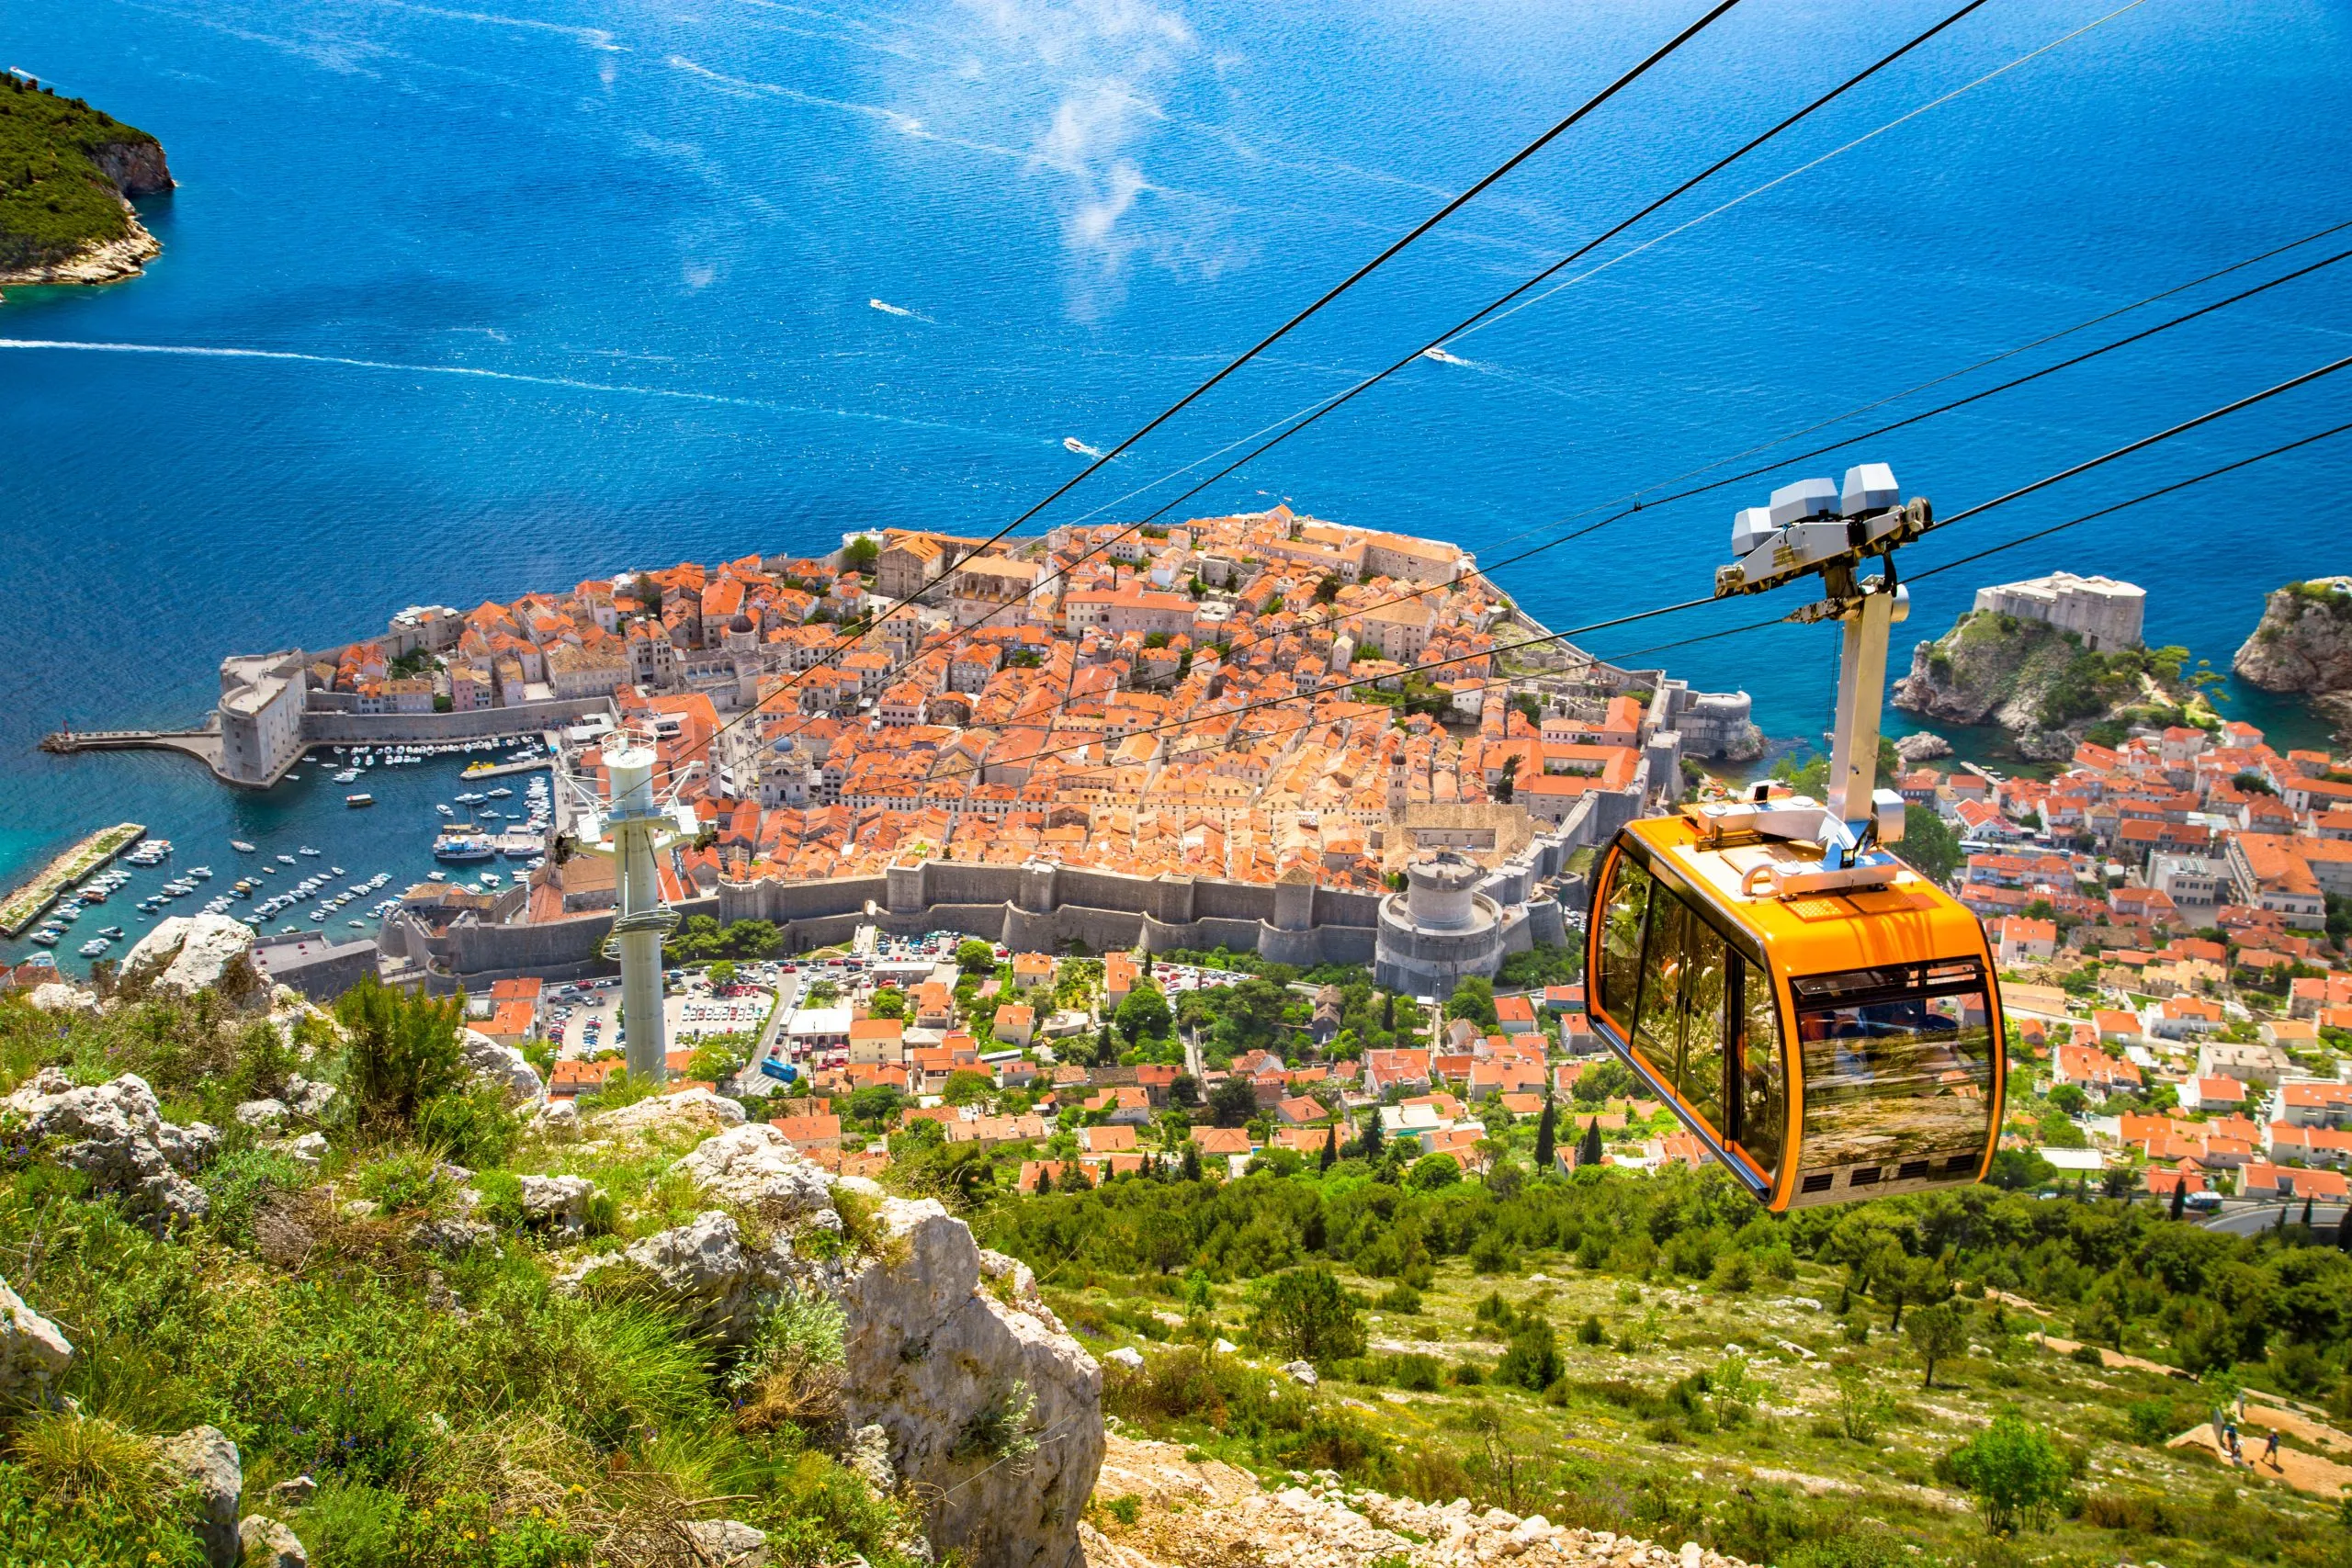 Old town of Dubrovnik with cable car ascending Srd mountain, Dalmatia, Croatia